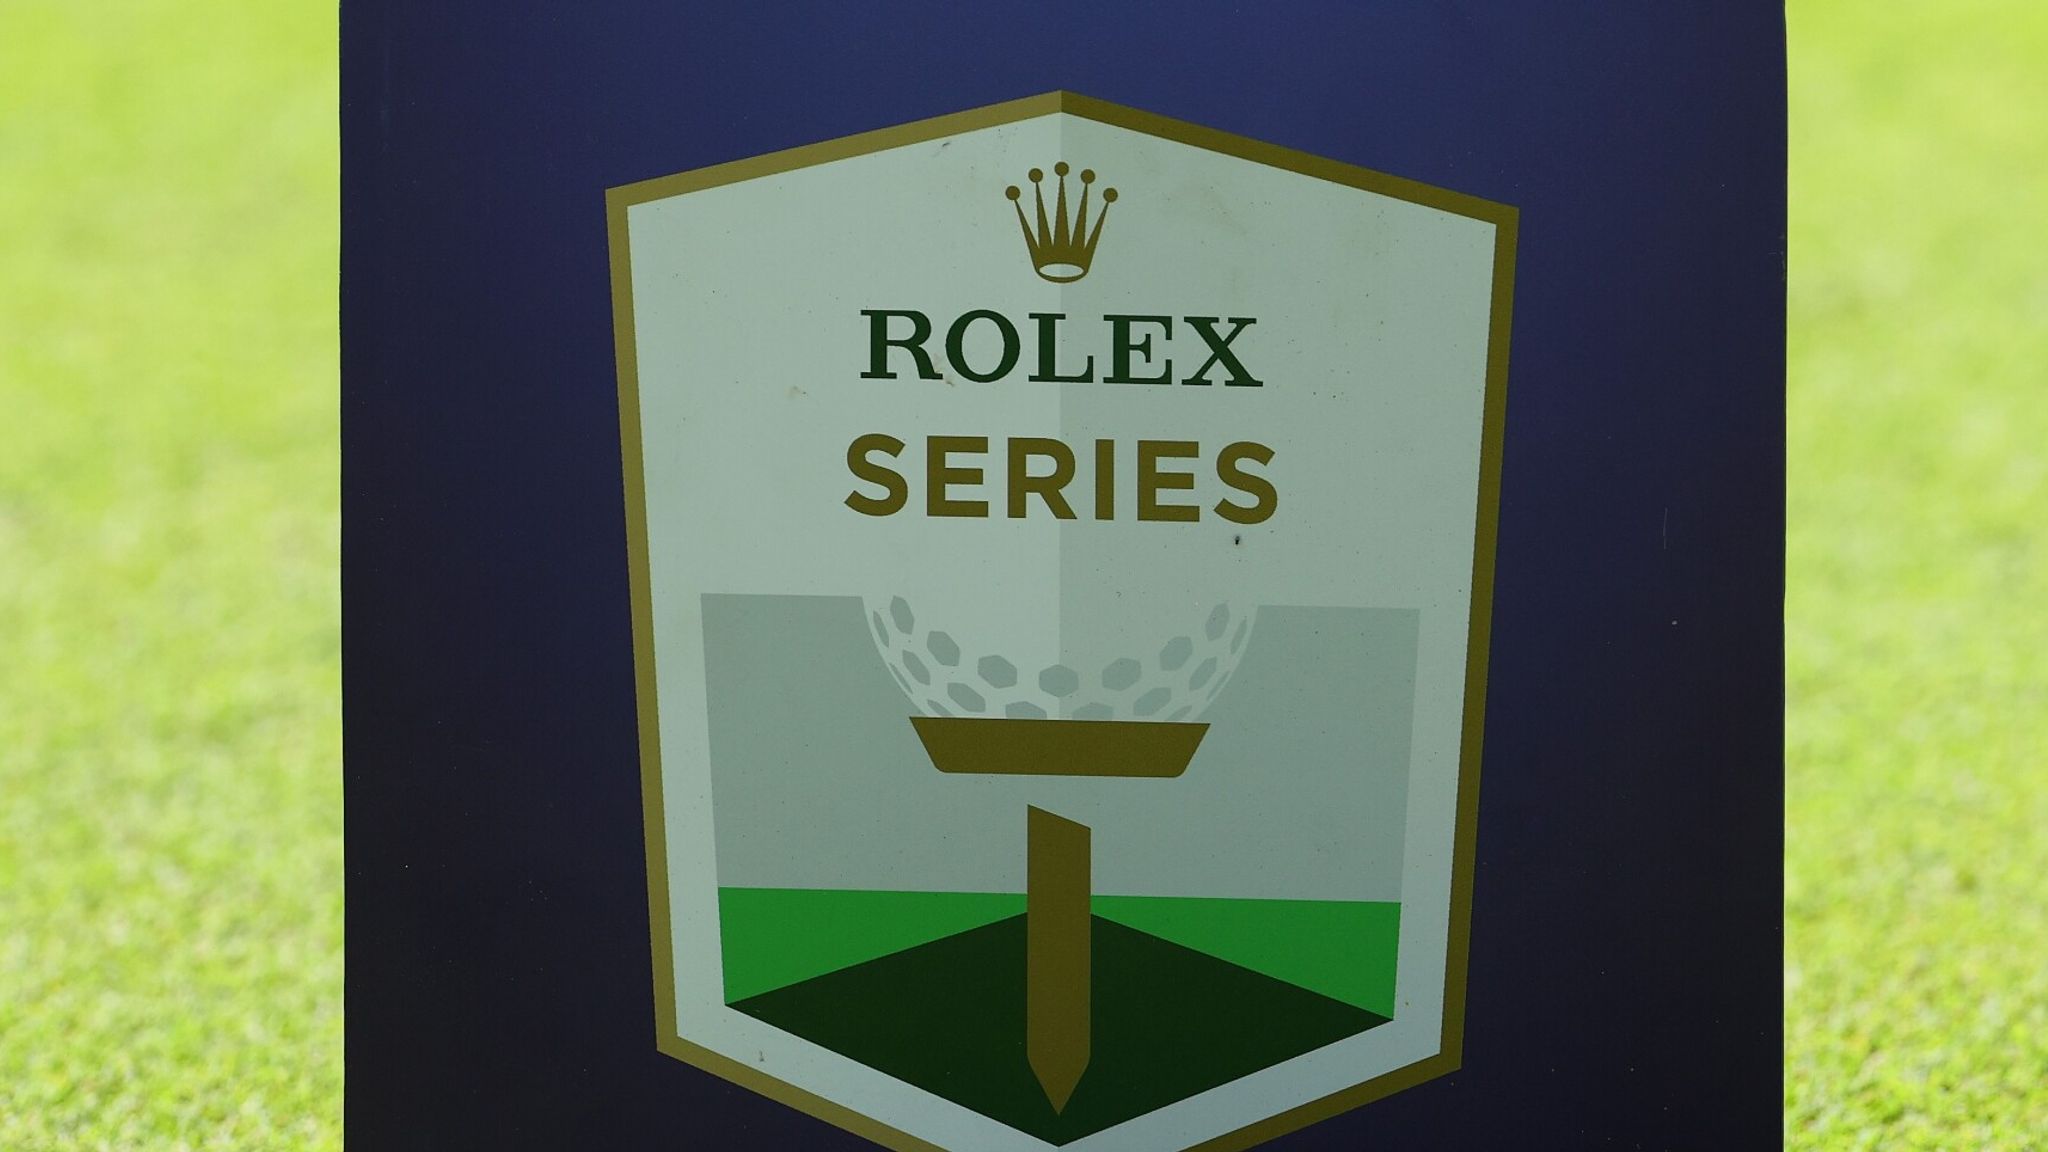 DP World Tour: All Rolex Series events in 2023 to be carbon neutral as part of 'net zero' target | Golf | Sky Sports